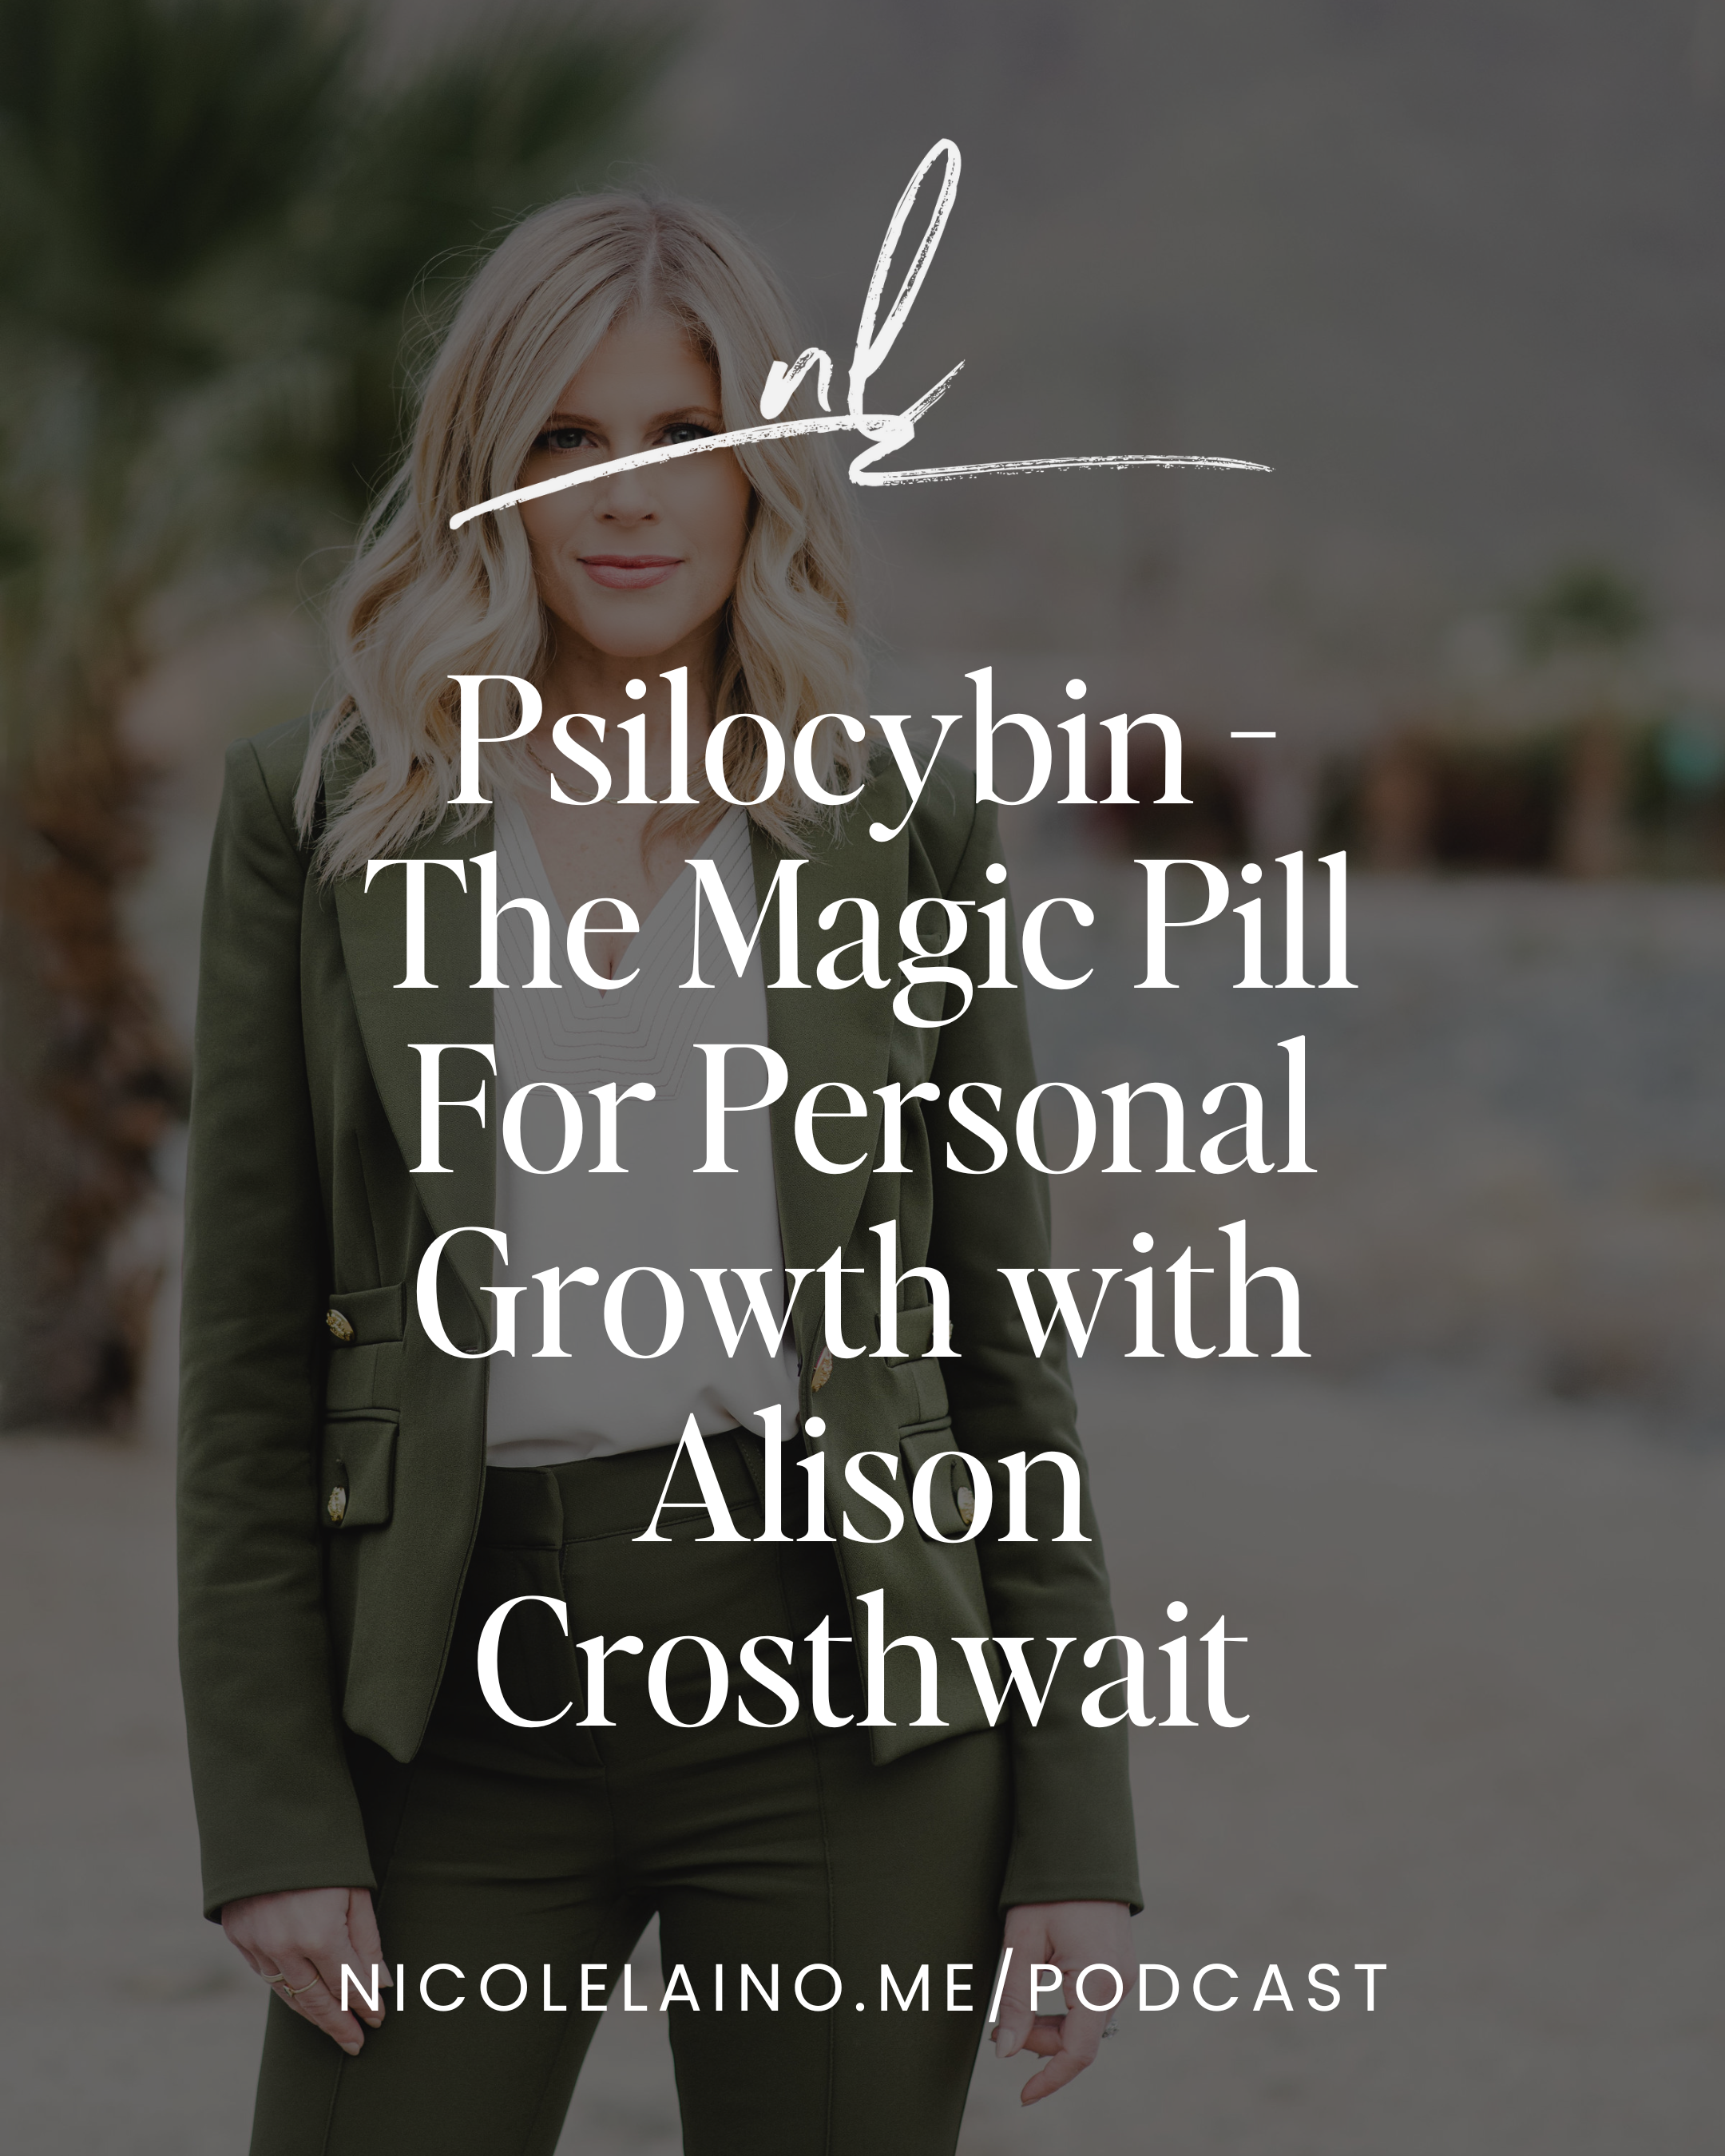 Psilocybin - The Magic Pill For Personal Growth with Alison Crosthwait